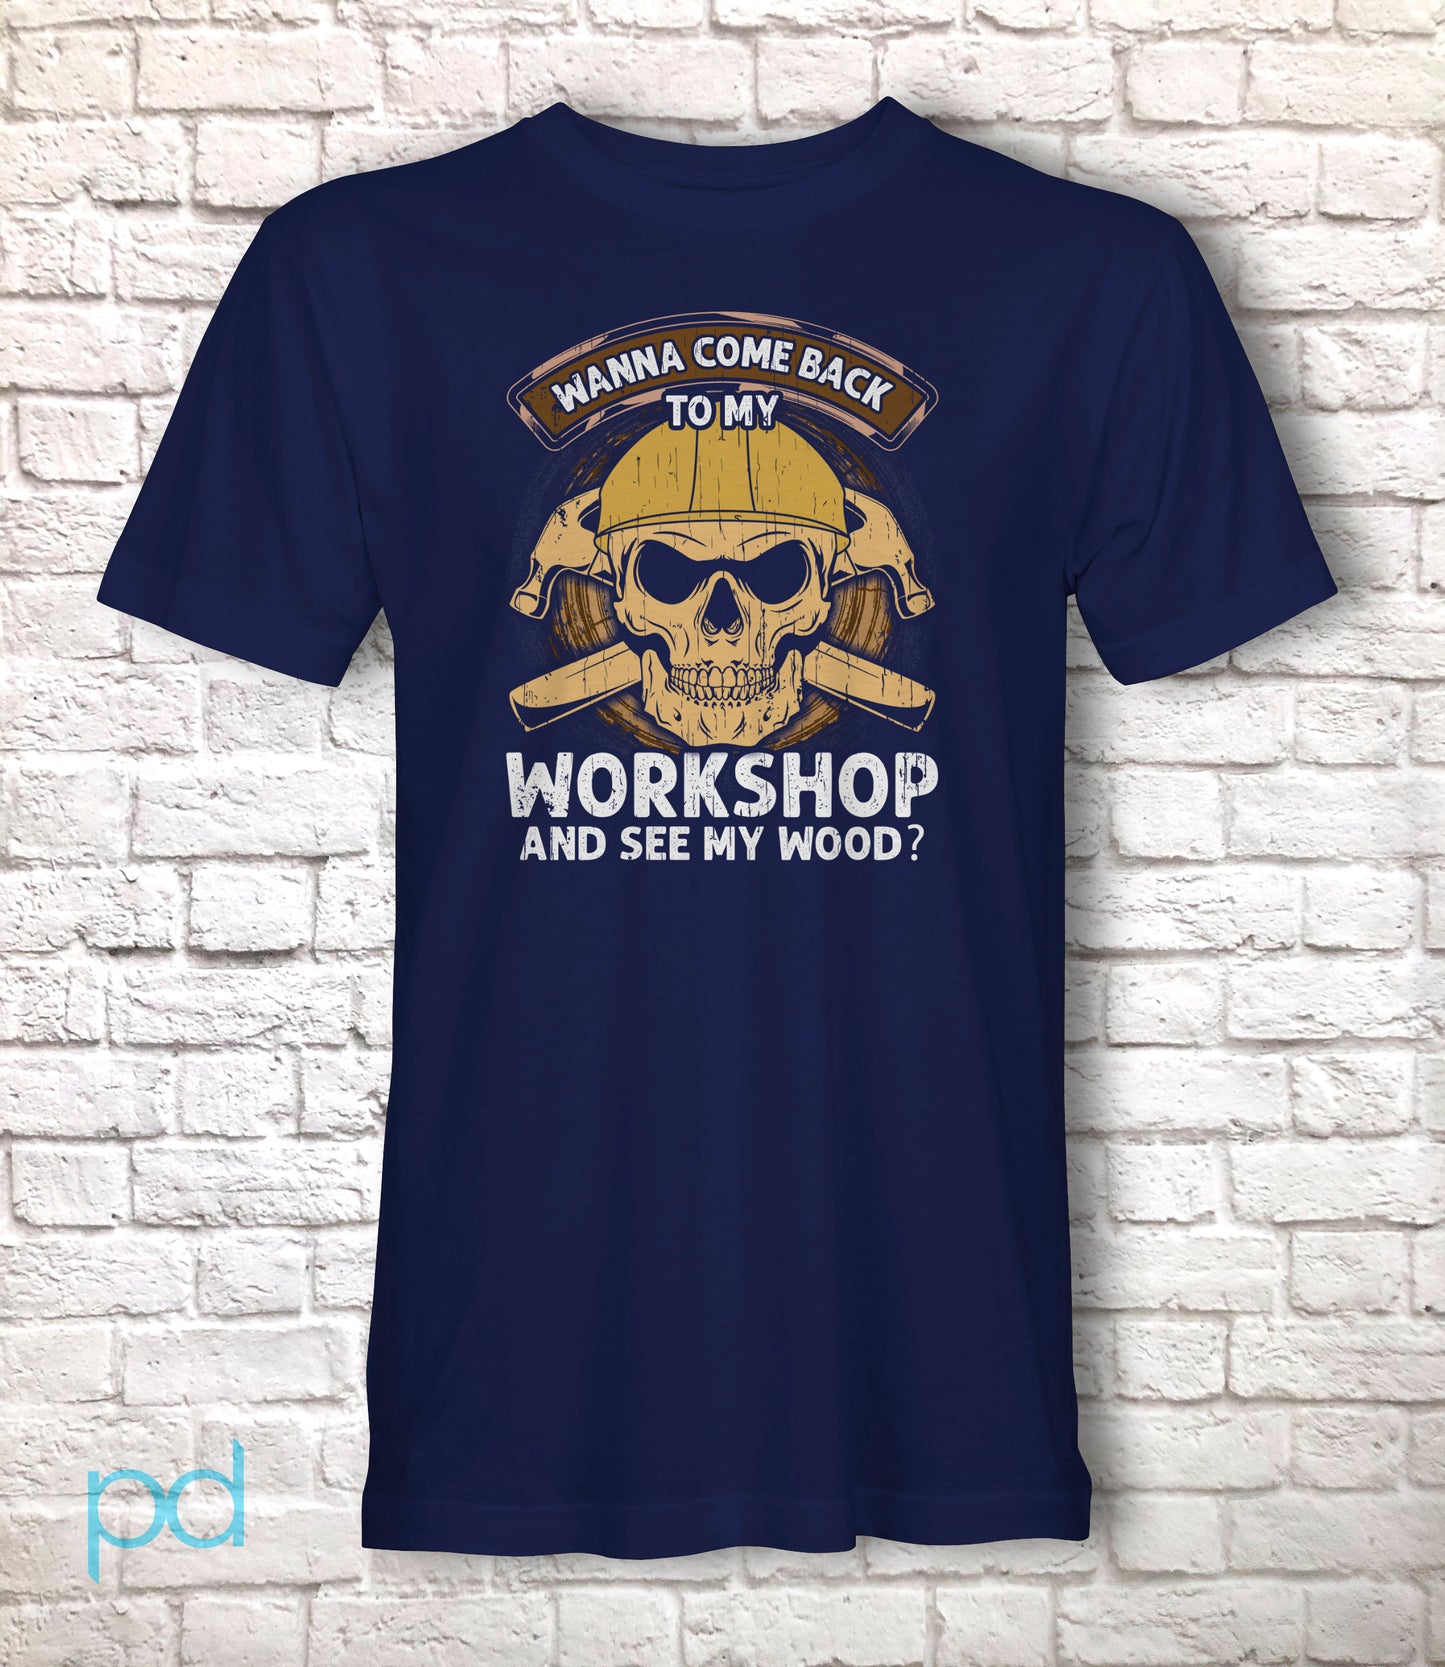 Funny Woodwork T-Shirt, Carpenter Gift Idea, Humorous Graphic Print Tee Shirt Top, Wanna Come Back To My Workshop And See My Wood? Meme